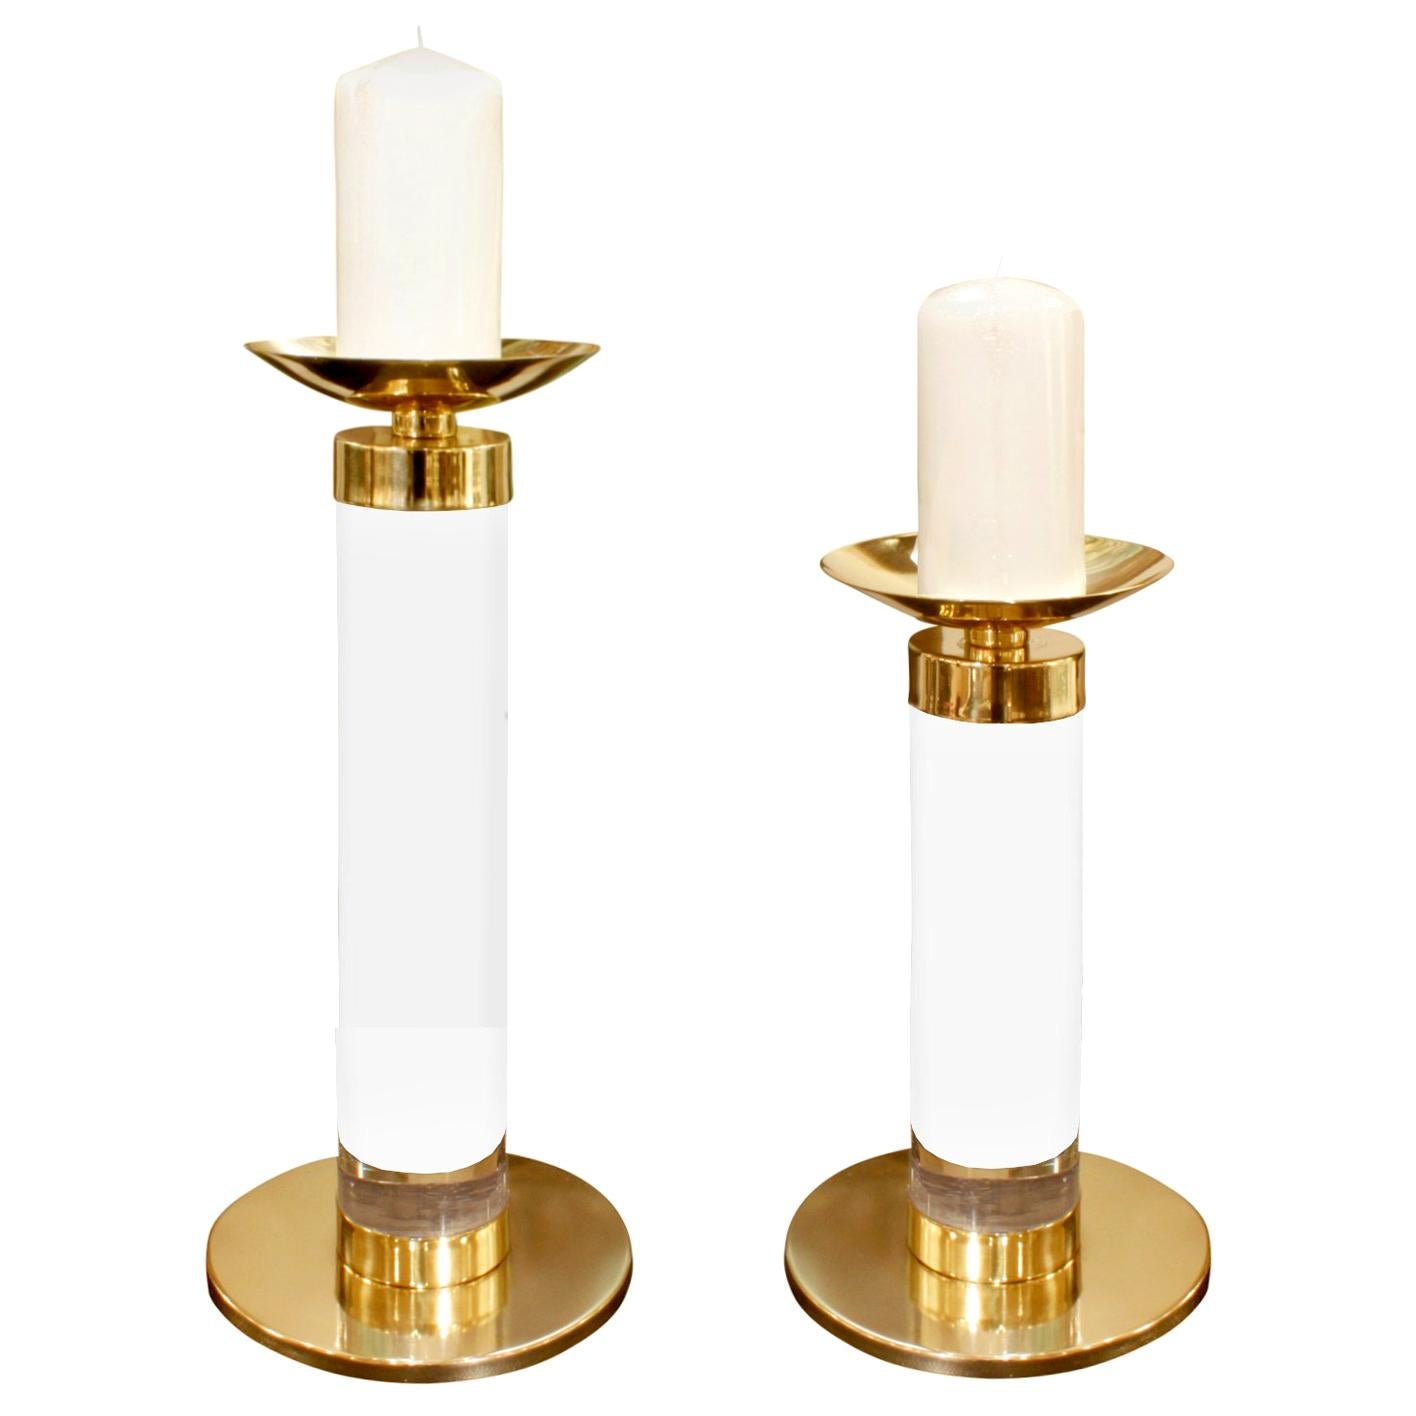 Karl Springer Pair of Candleholders in Lucite and Brass, 1970s